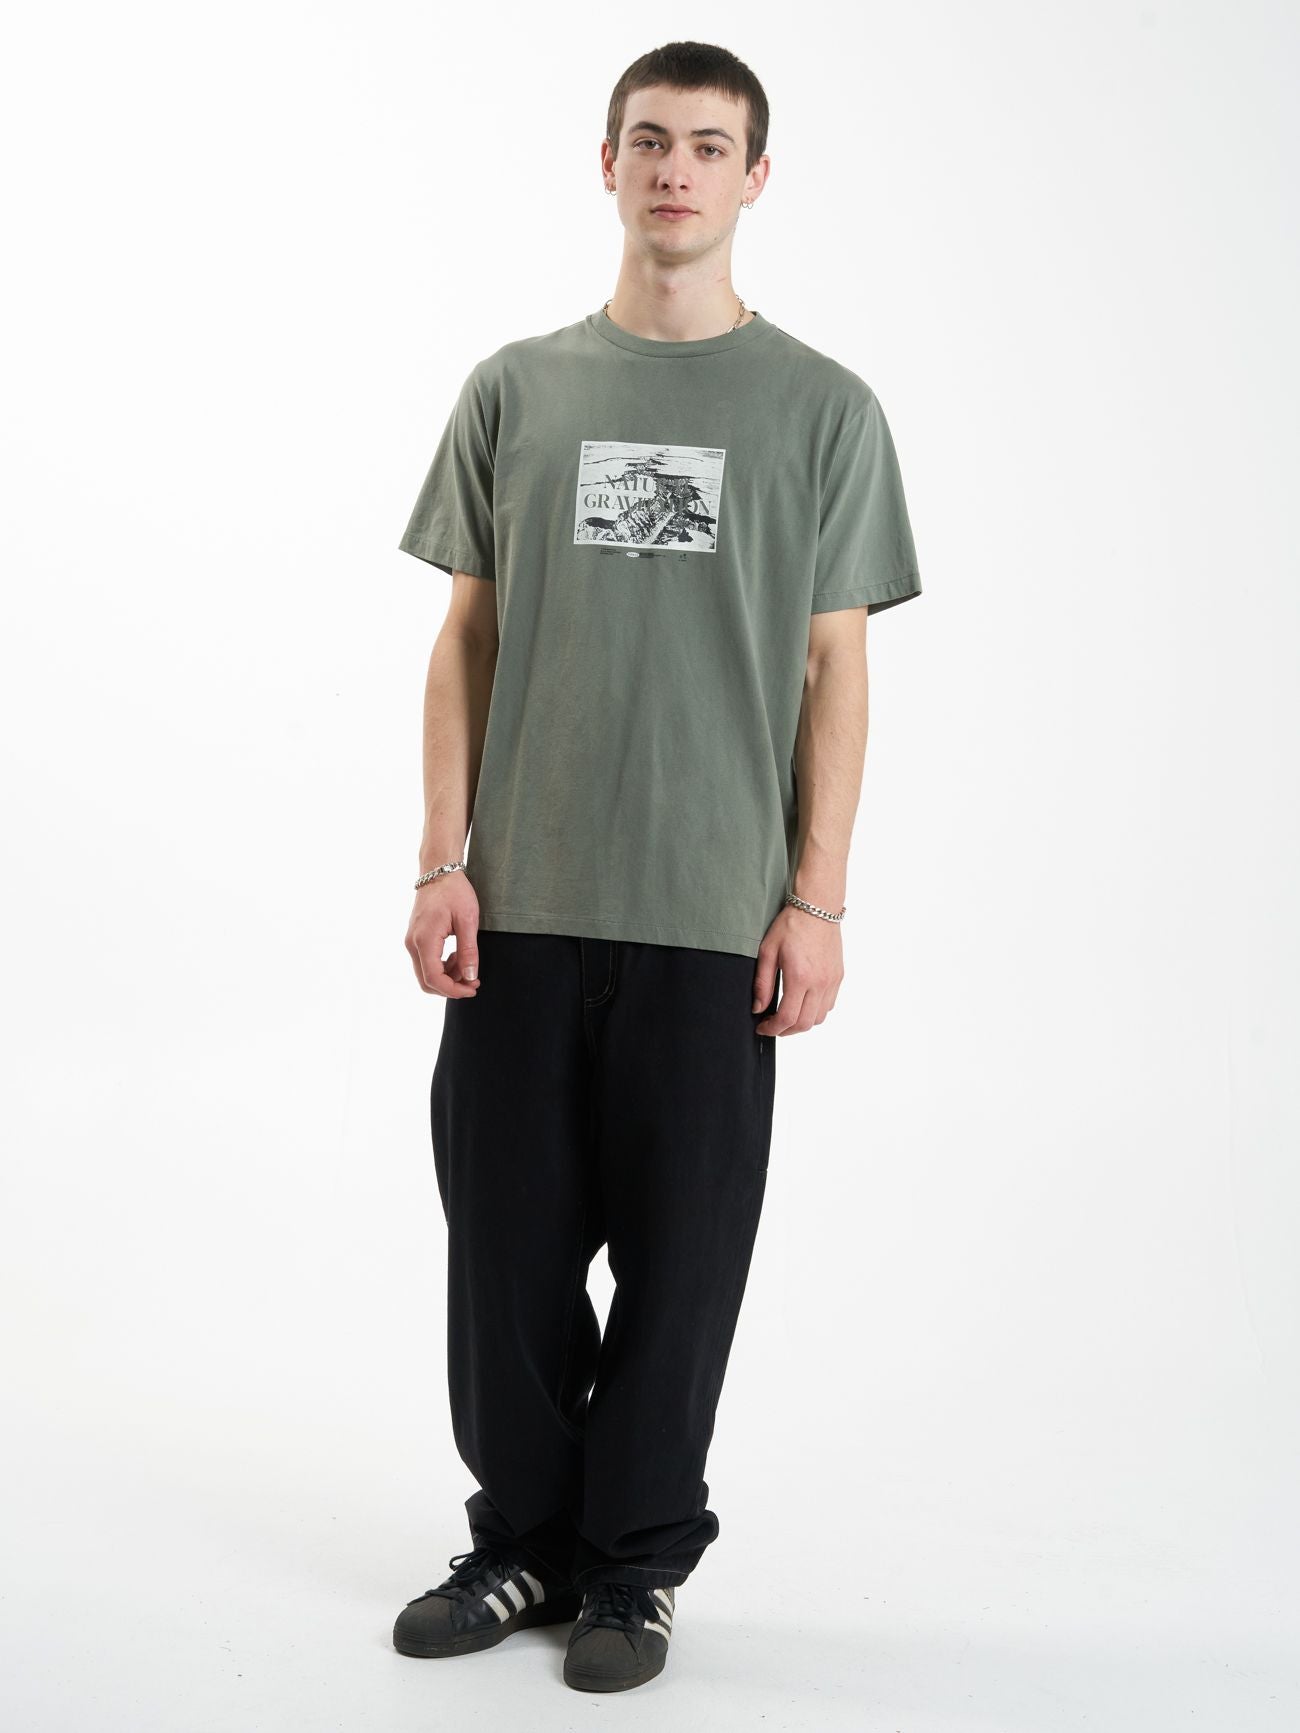 THRILLS - GRAVITATING NATURALLY MERCH FIT TEE - THYME